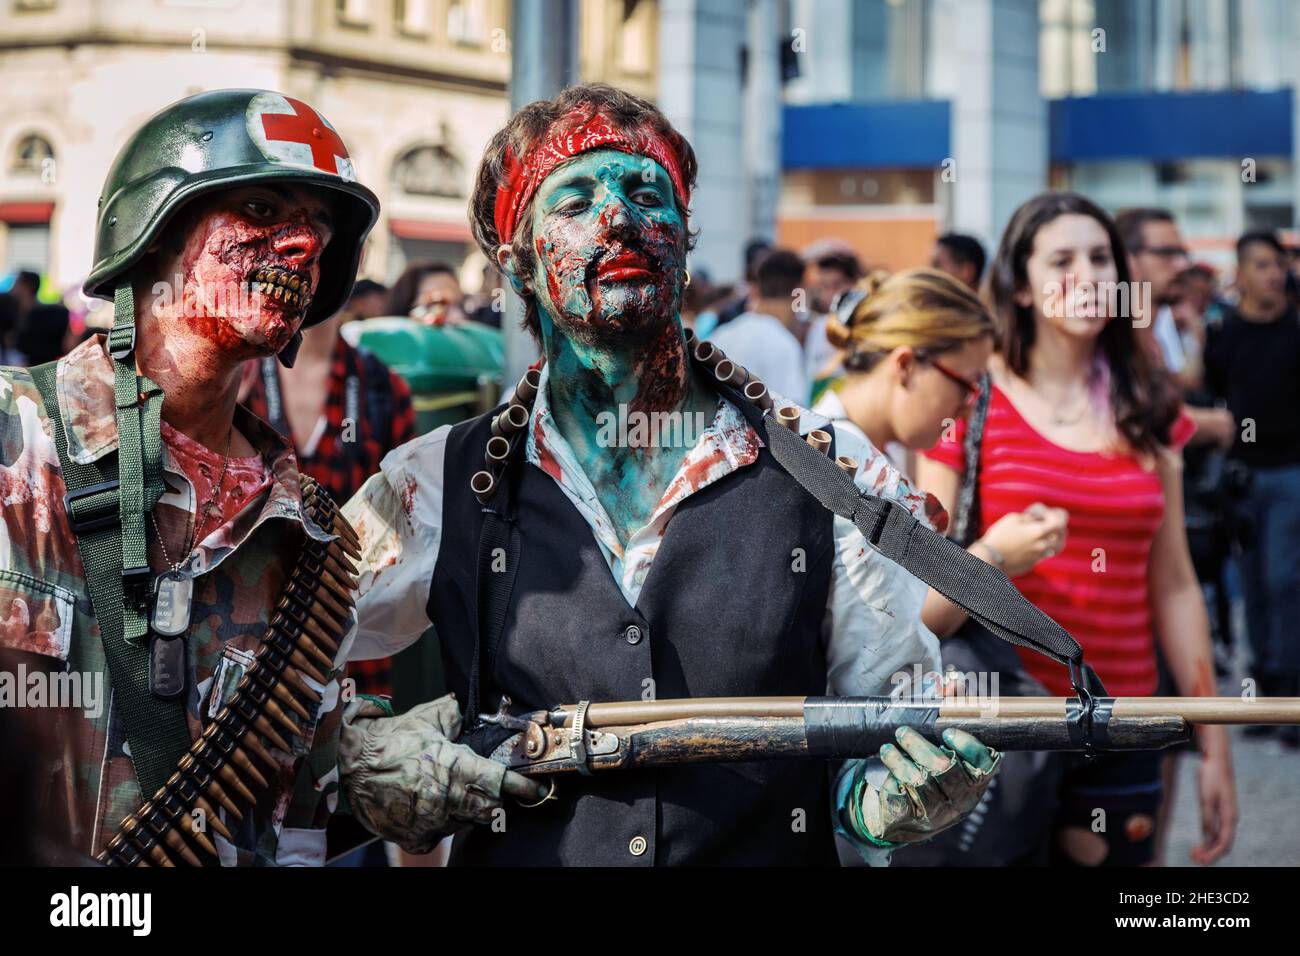 Sao Paulo, Brazil. 2nd November, 2013. People dressed up as zombies attend the annual Zombie Walk in Sao Paulo, Brazil. Stock Photo